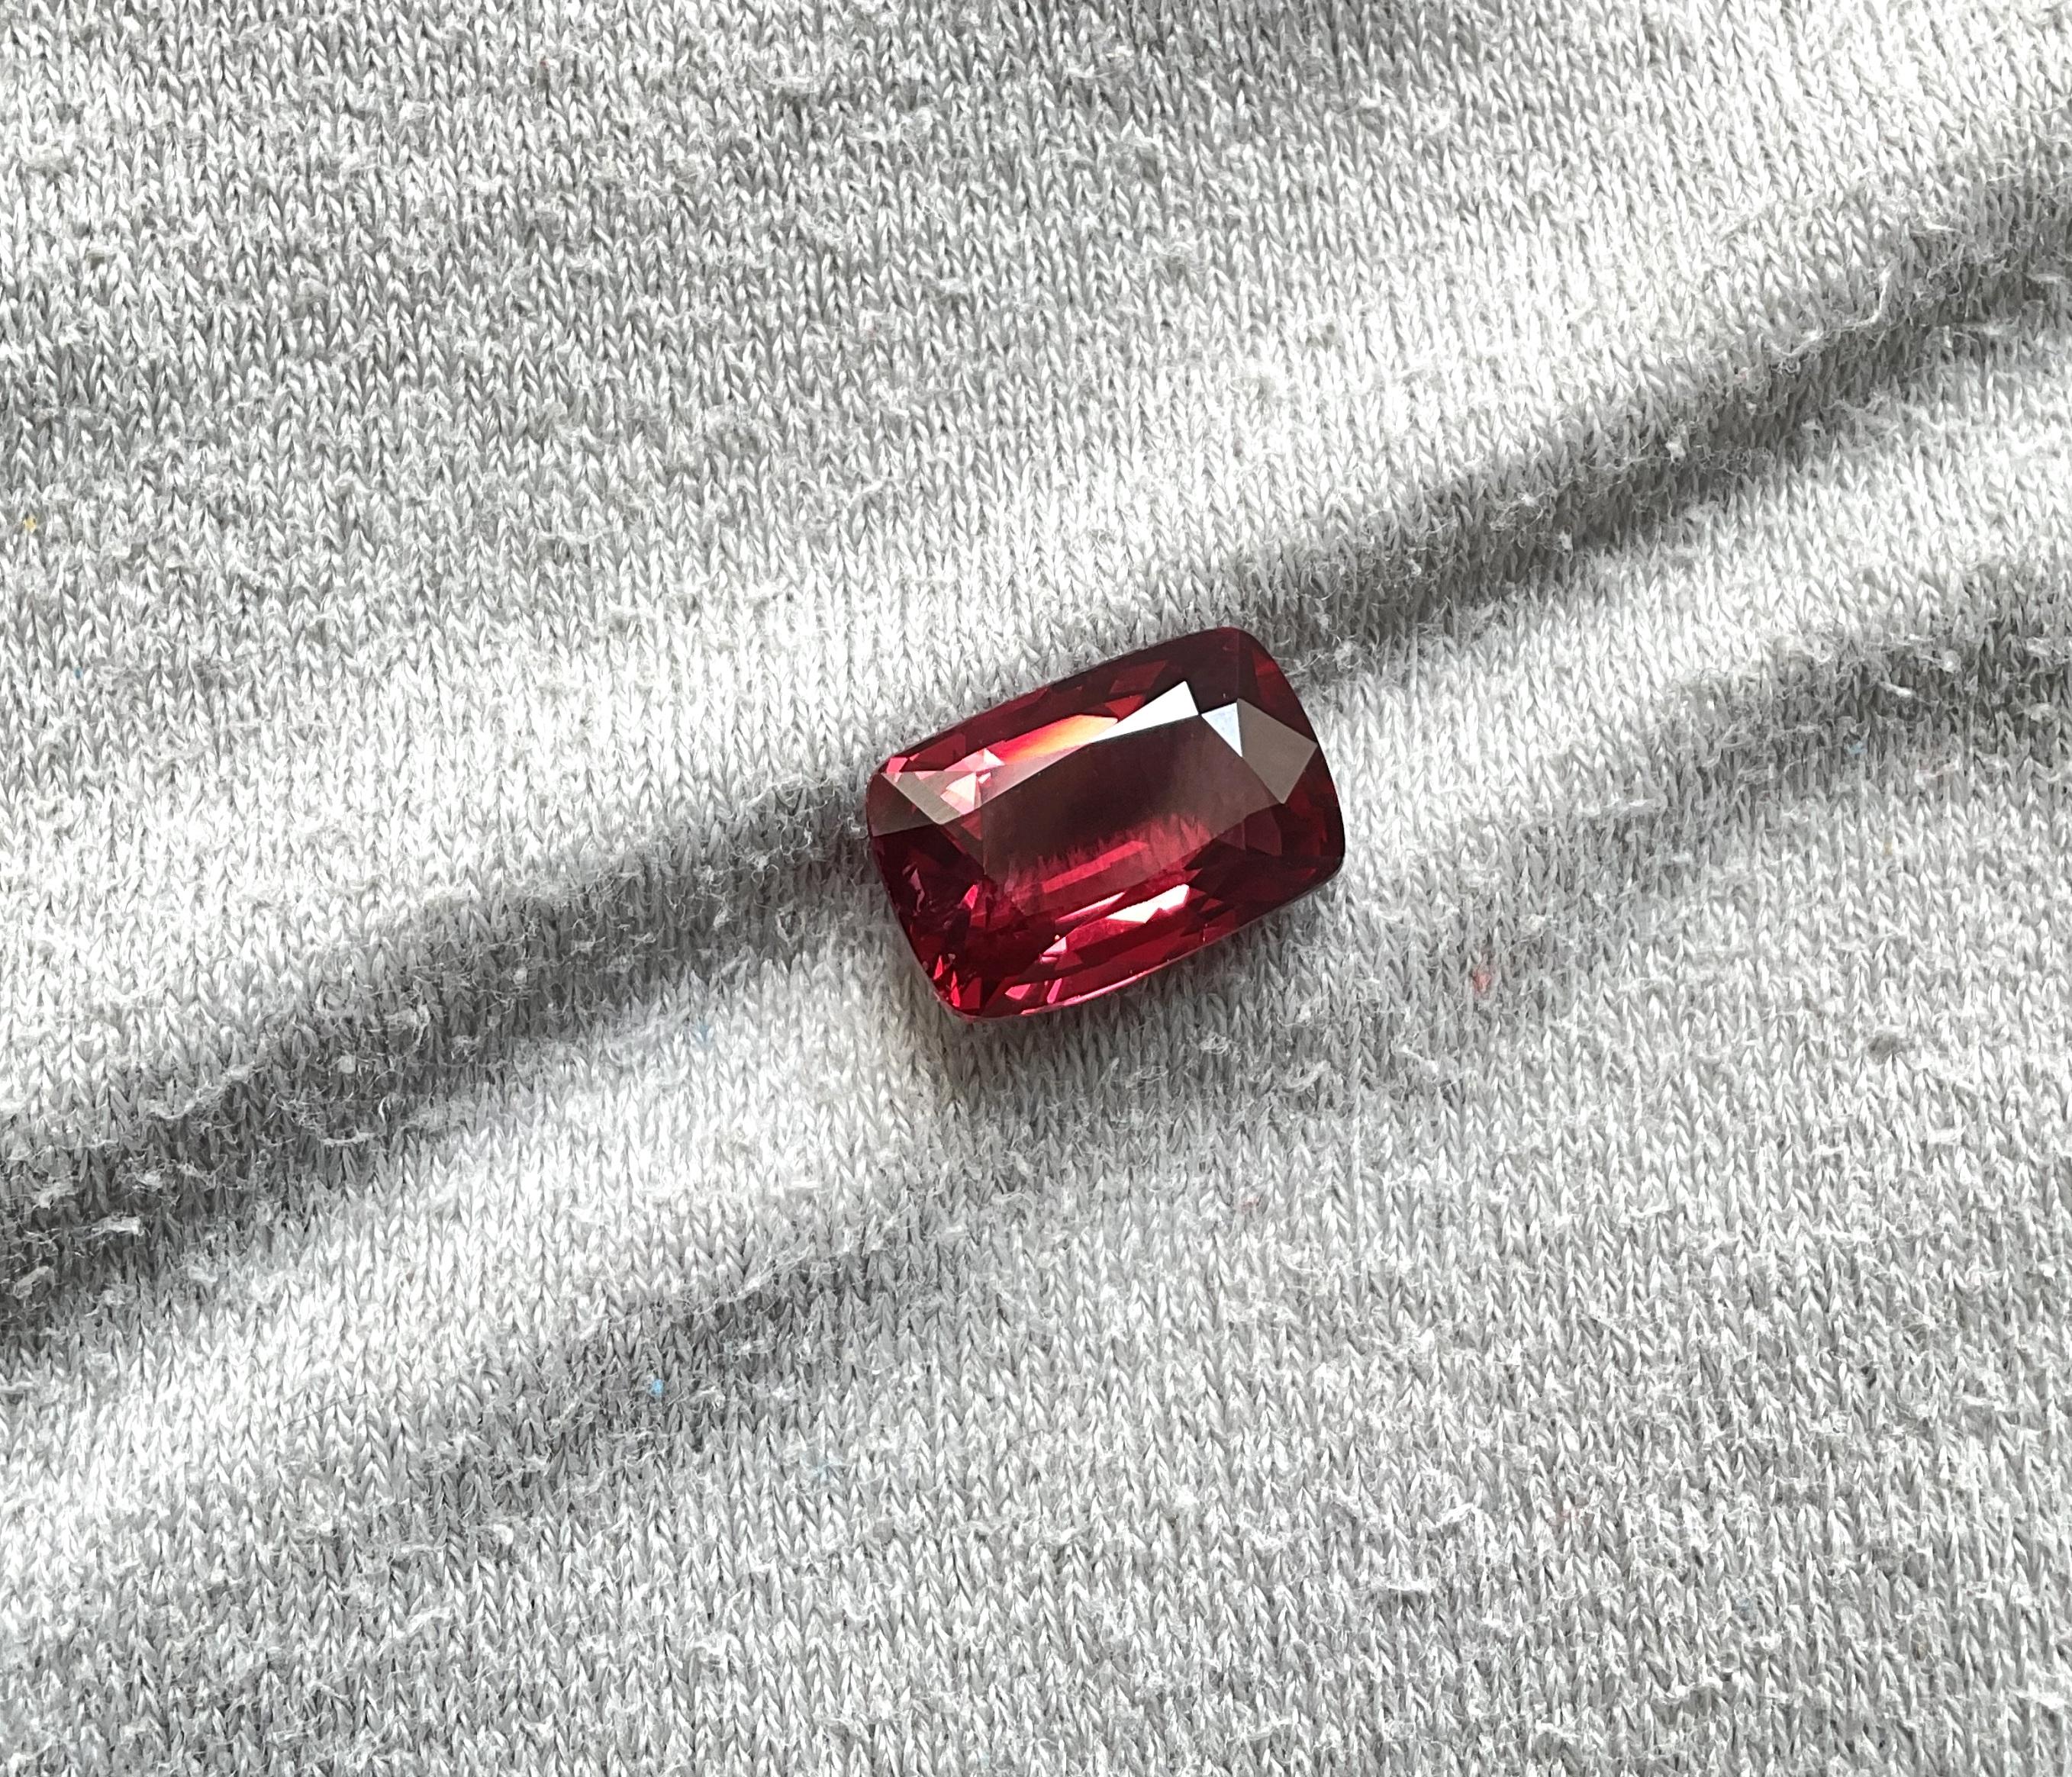 certified 5.11 carats burmese red spinel natural cushion cut stone natural gem For Sale 2